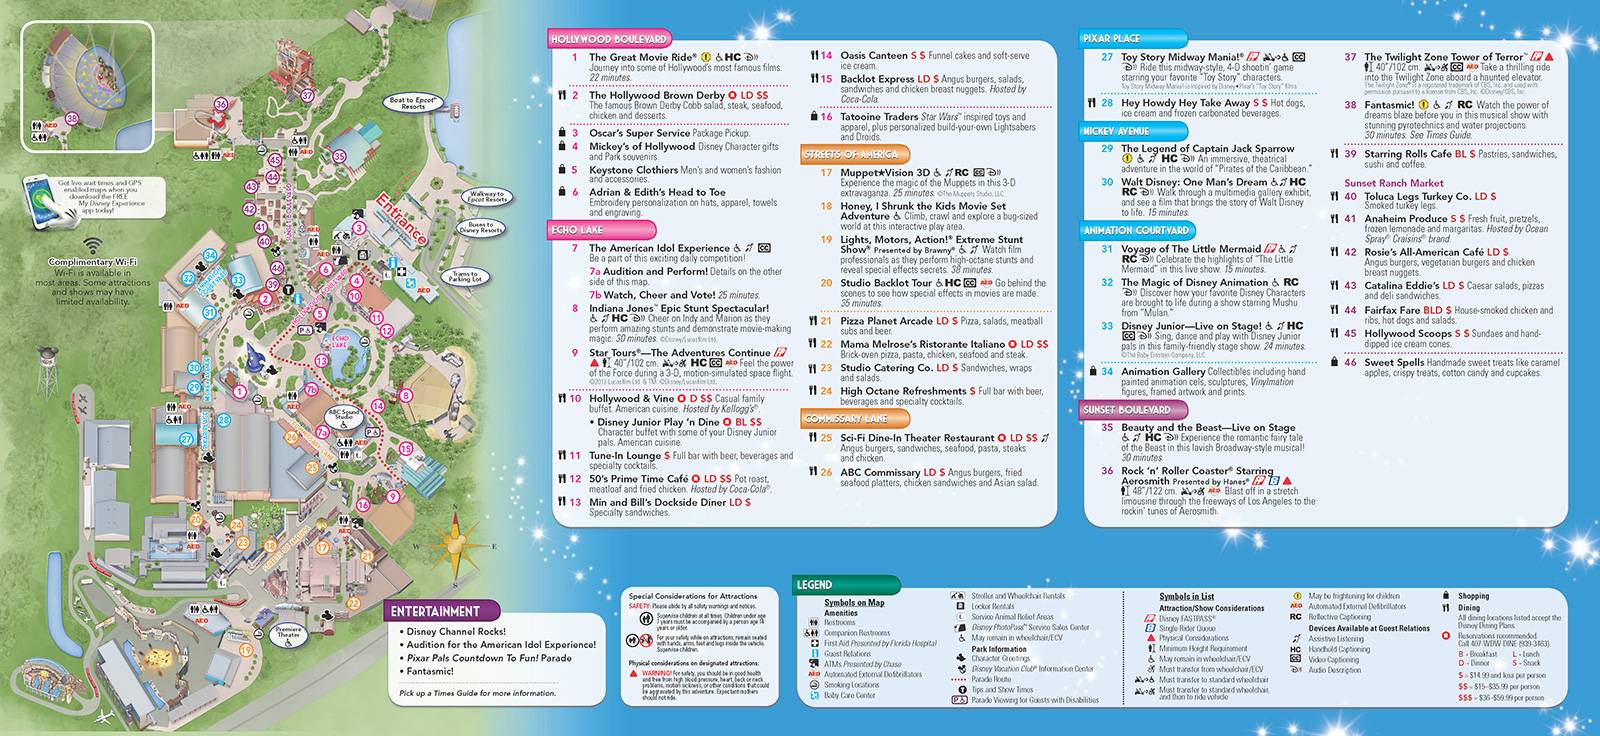 PHOTOS - New redesigned guidemaps and times guides now in the parks